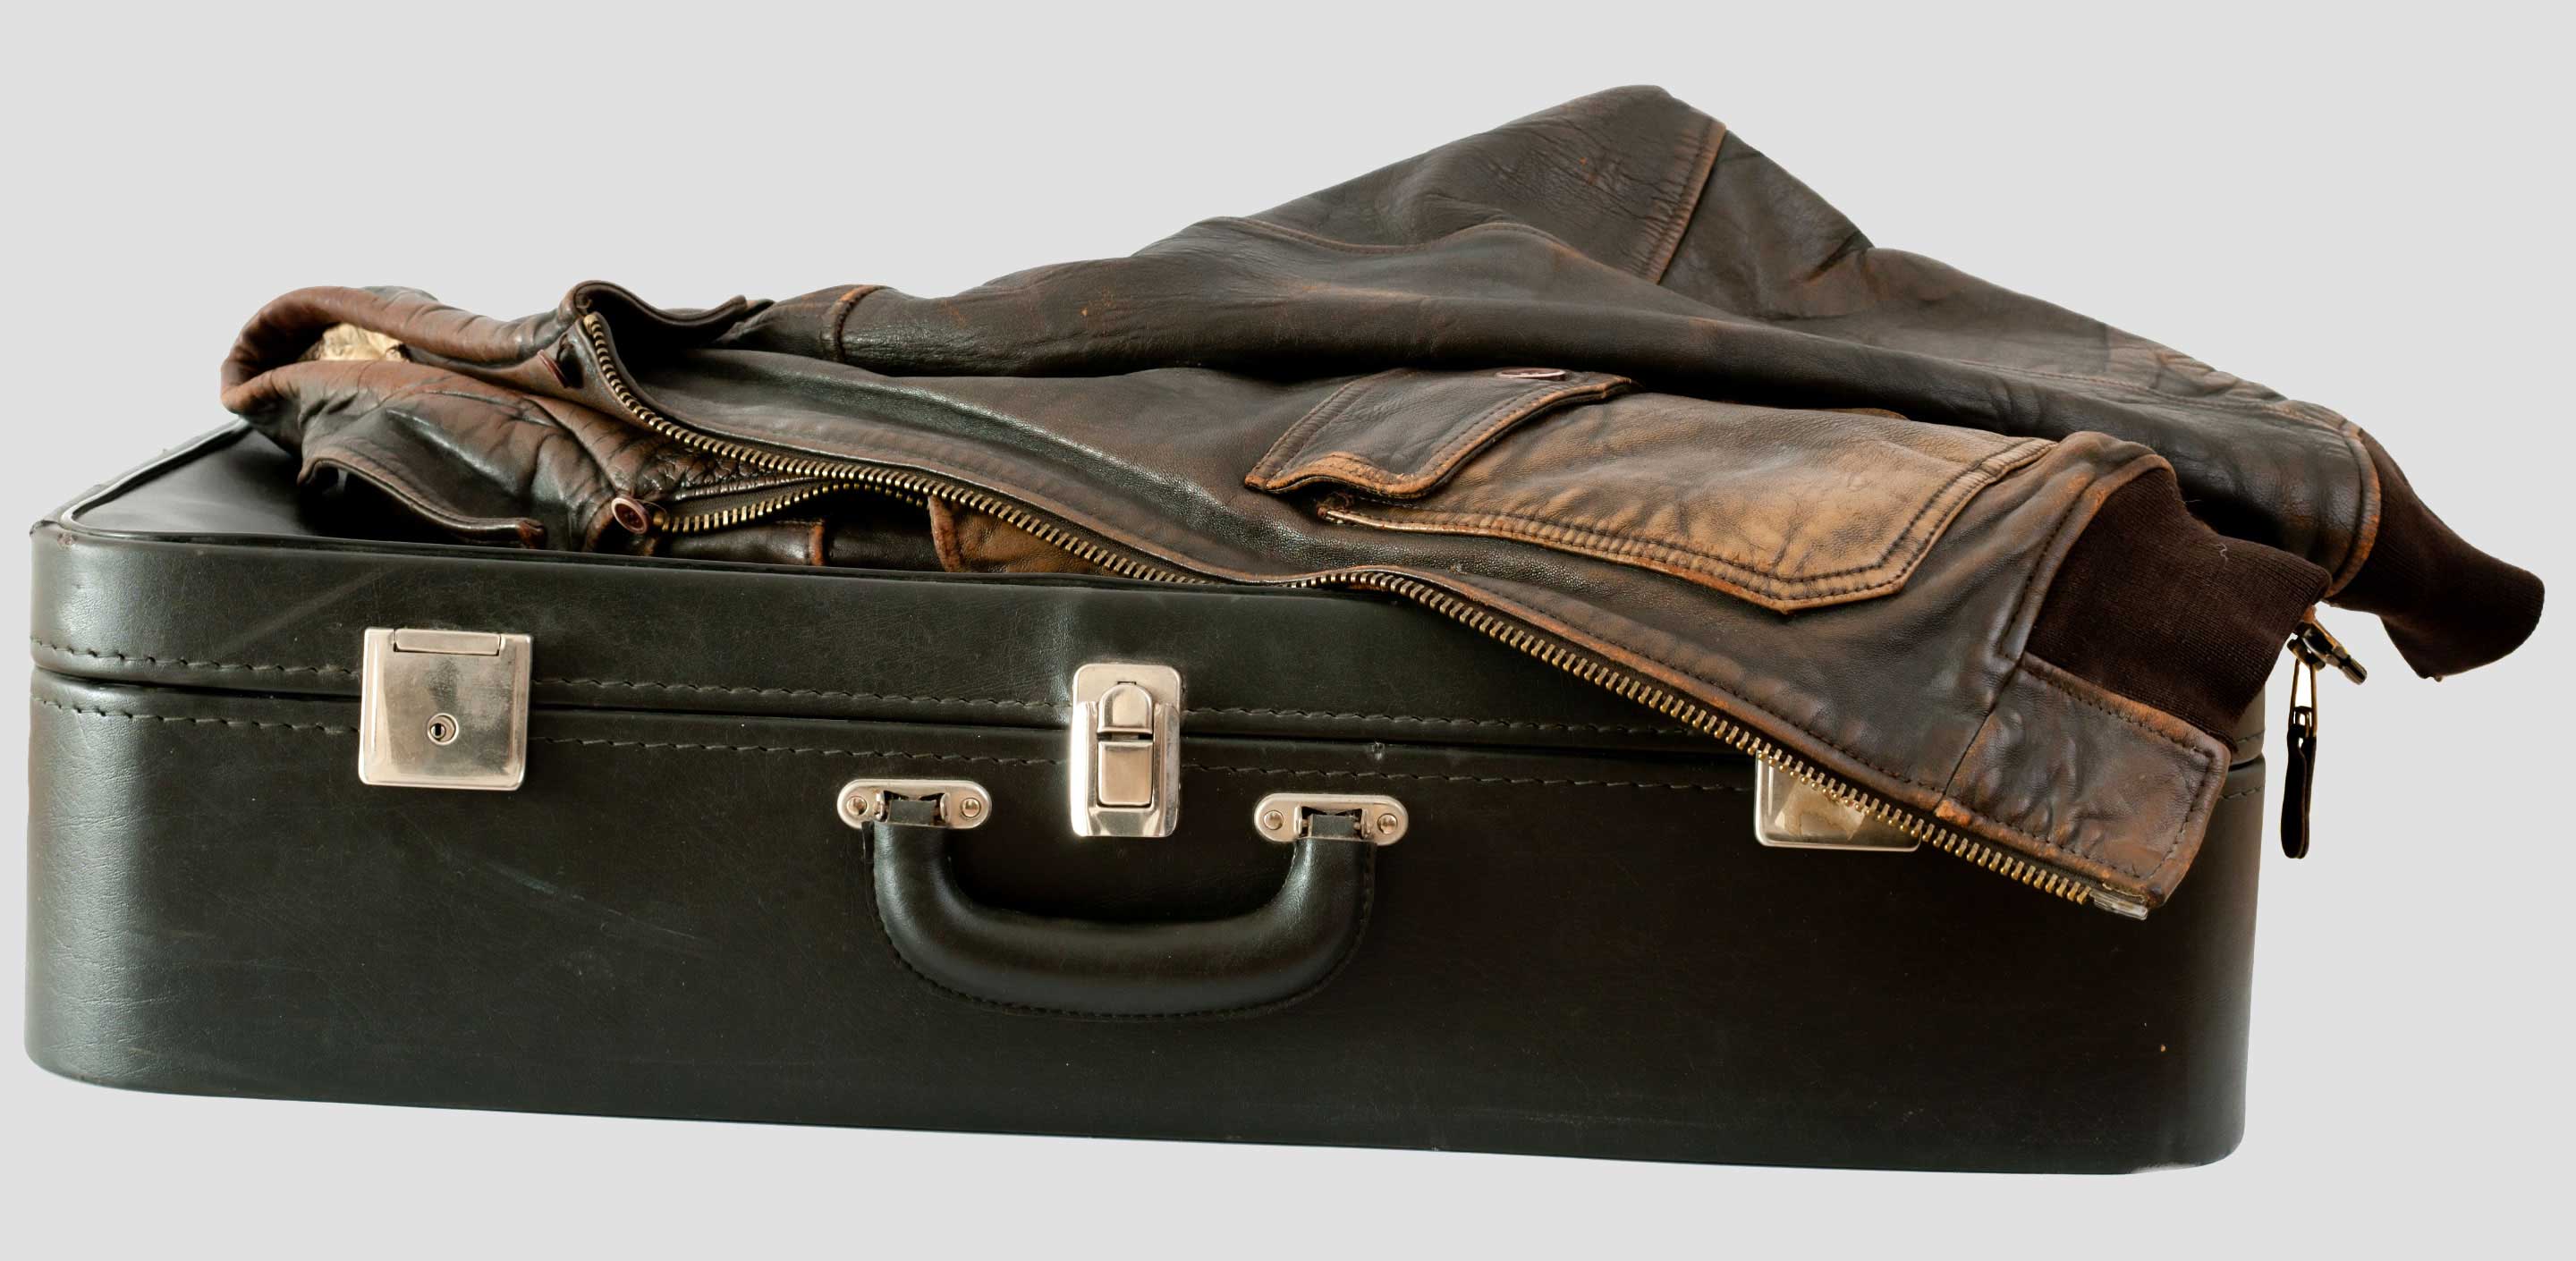 How do you store leather jackets long-term?